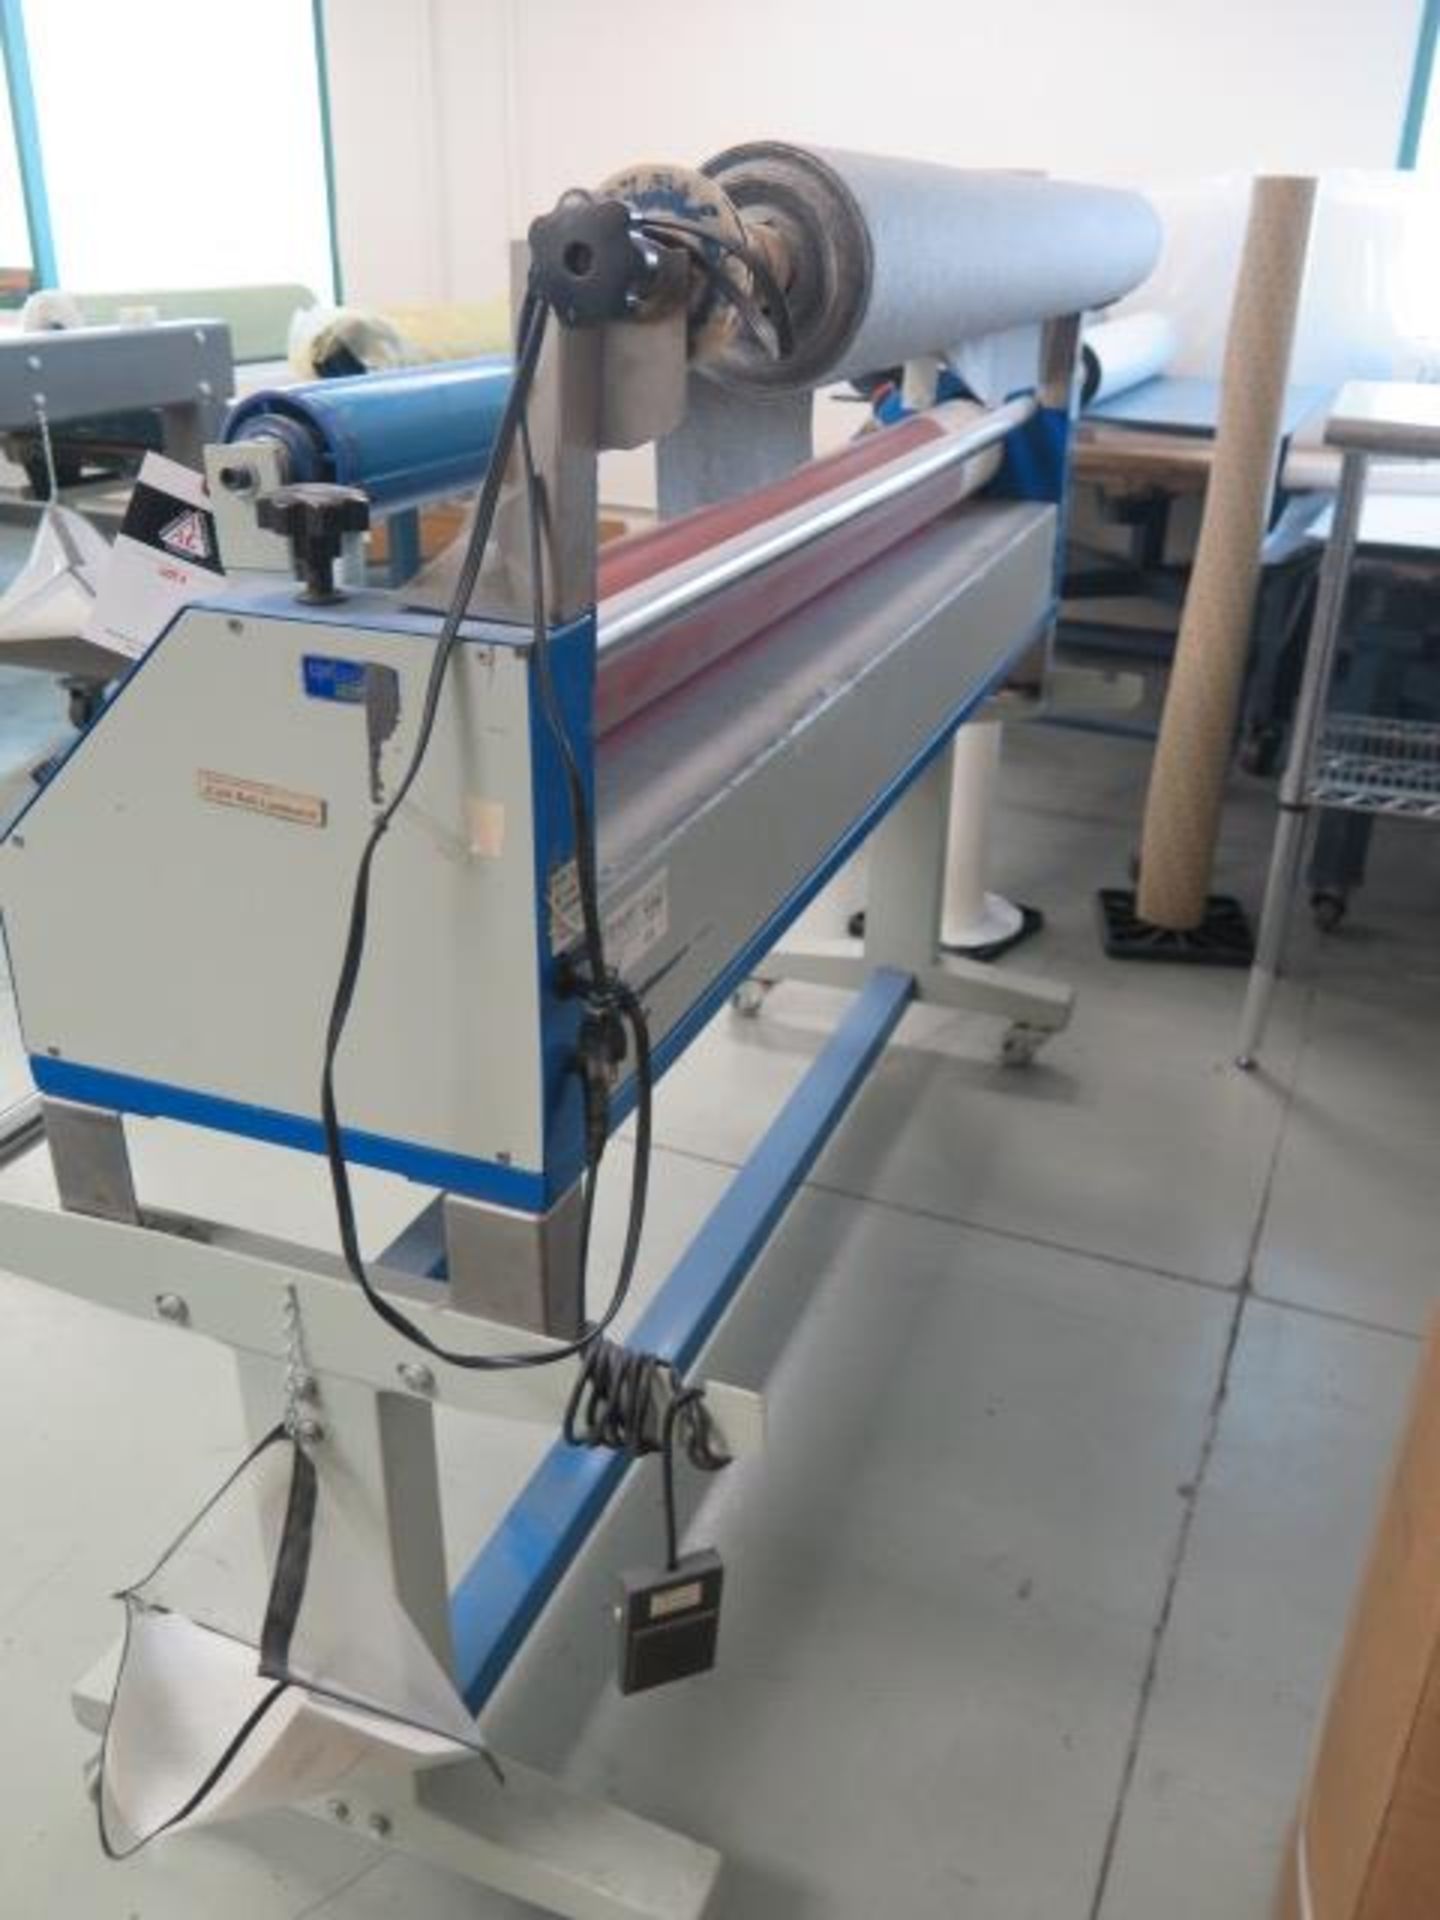 US Tech Master “Worf 63A-Plus” 63” Cold Roll Laminator (SOLD AS-IS - NO WARRANTY) - Image 7 of 9